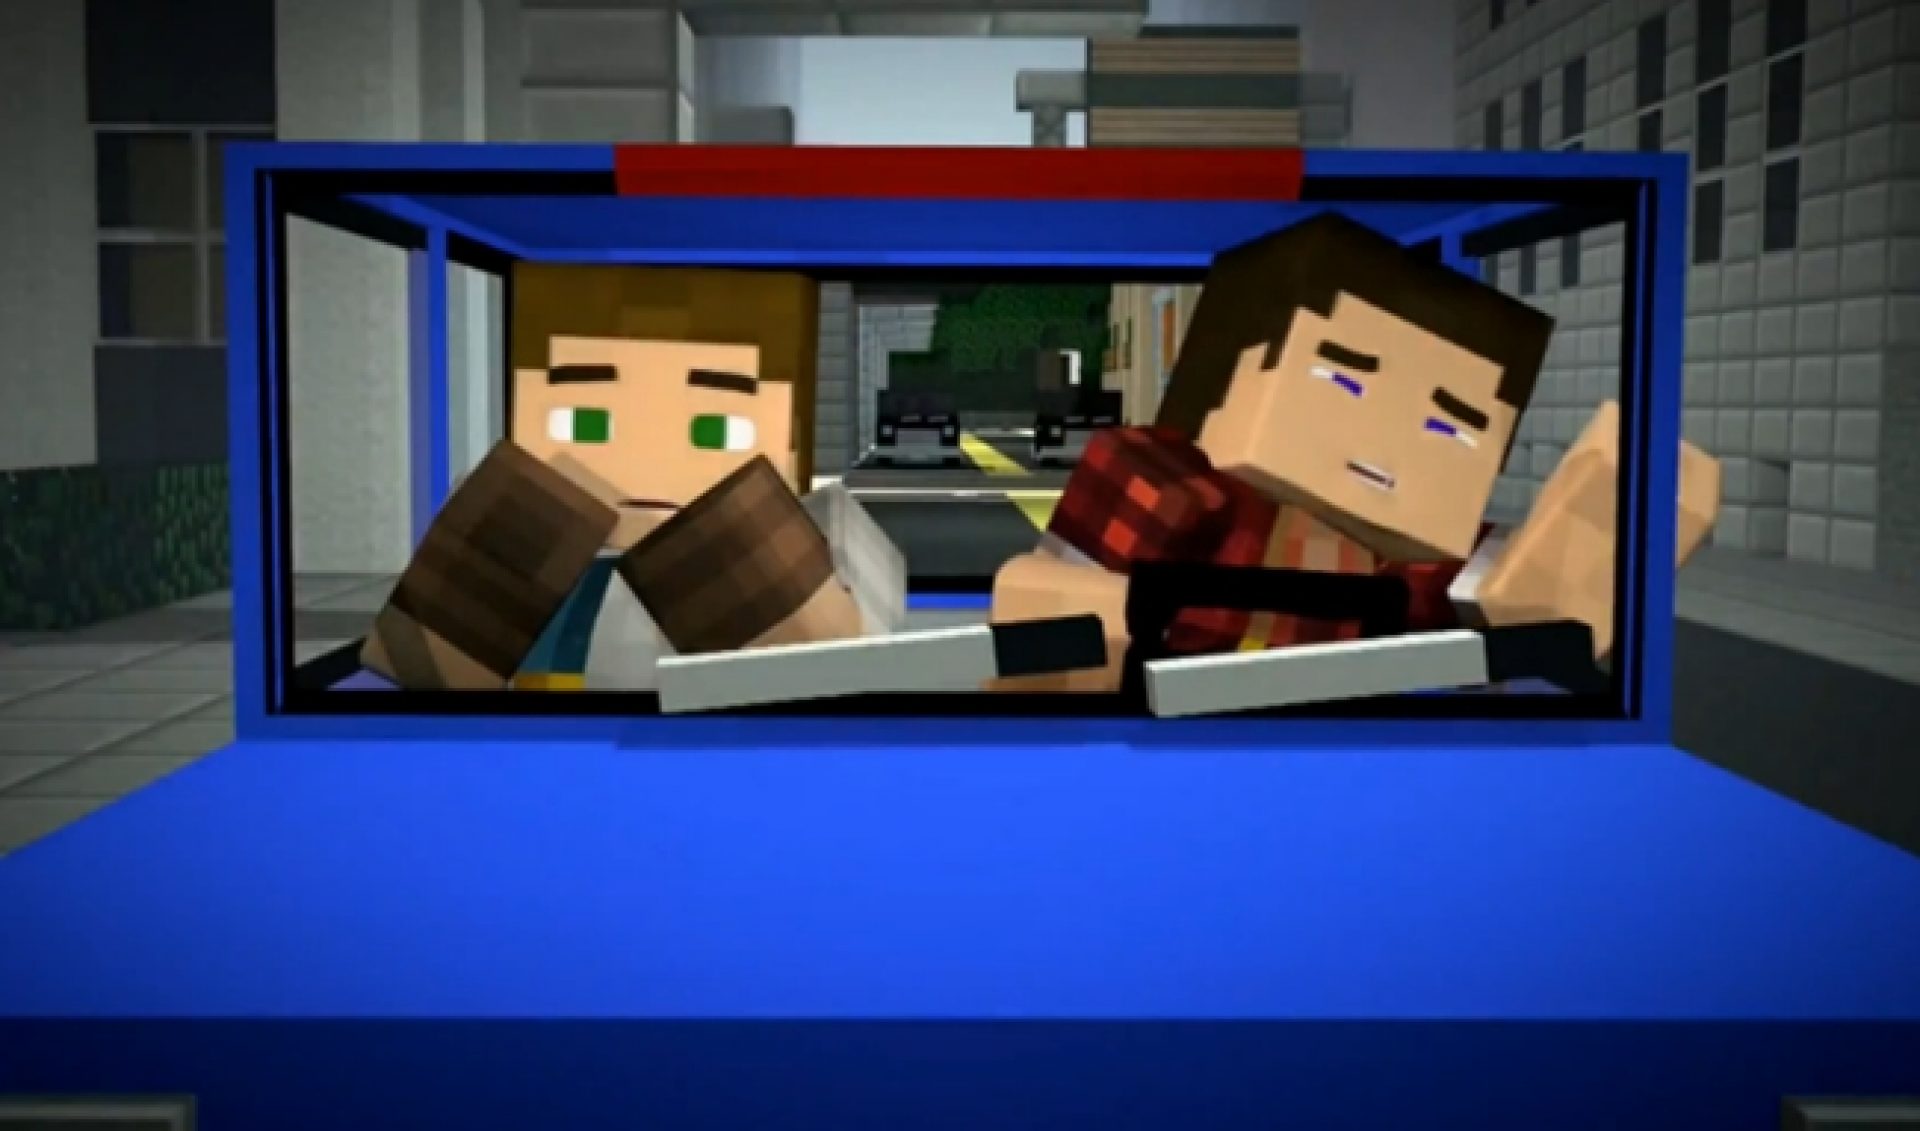 Comedy Central Offers Minecraft Humor With New Web Series 'Pixelheads'